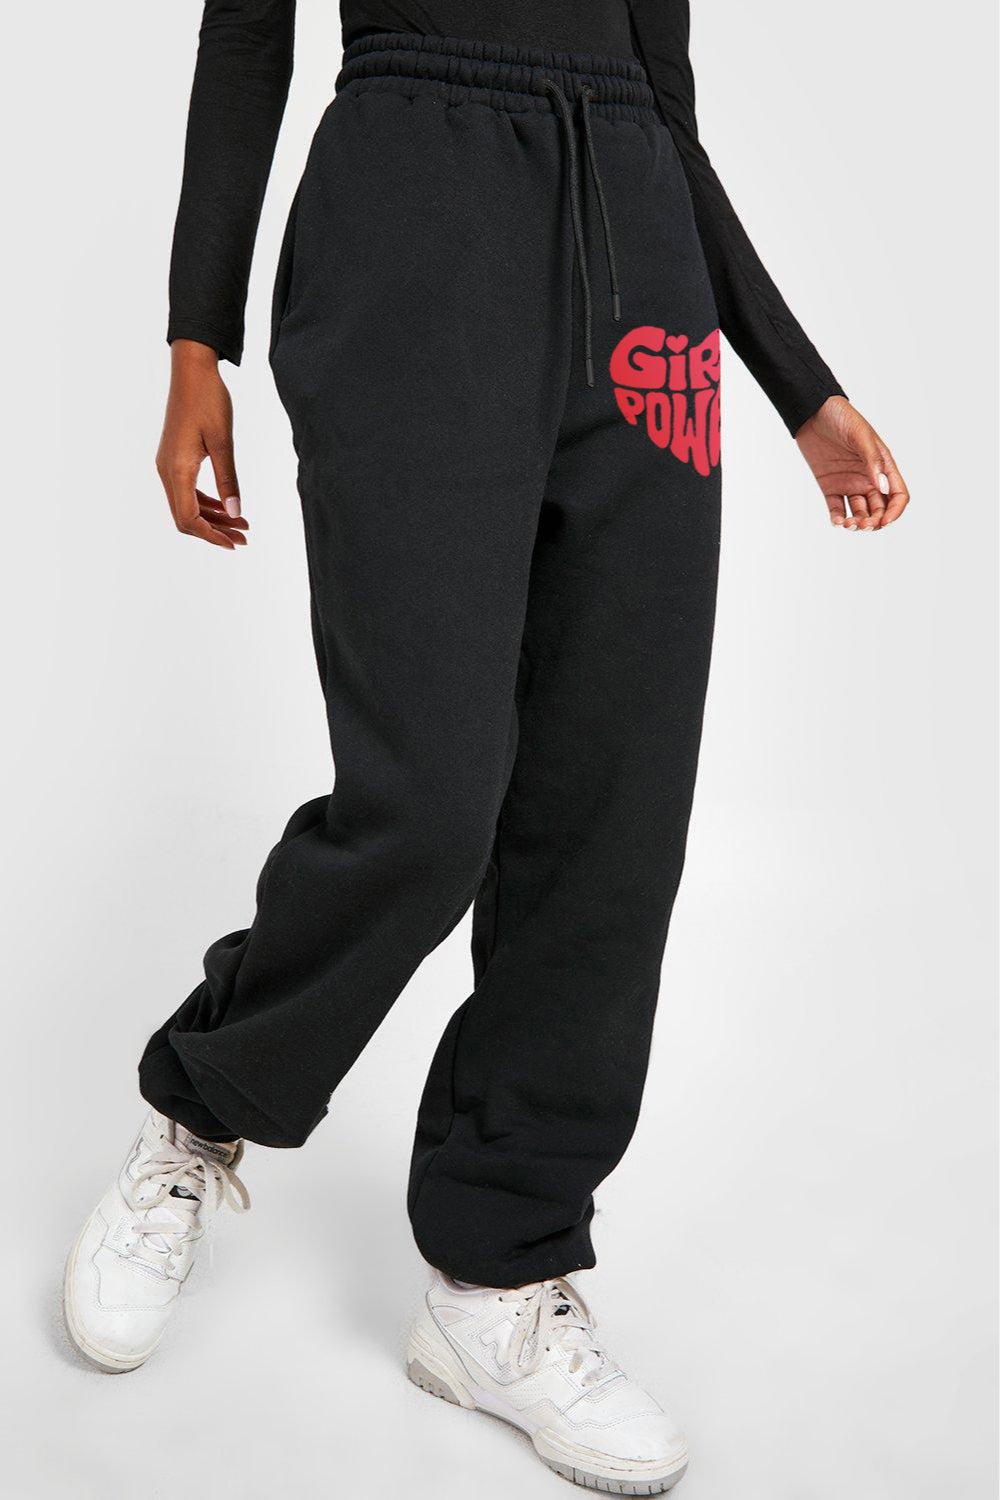 Simply Love Full Size GIRL POWER Graphic Sweatpants BLUE ZONE PLANET